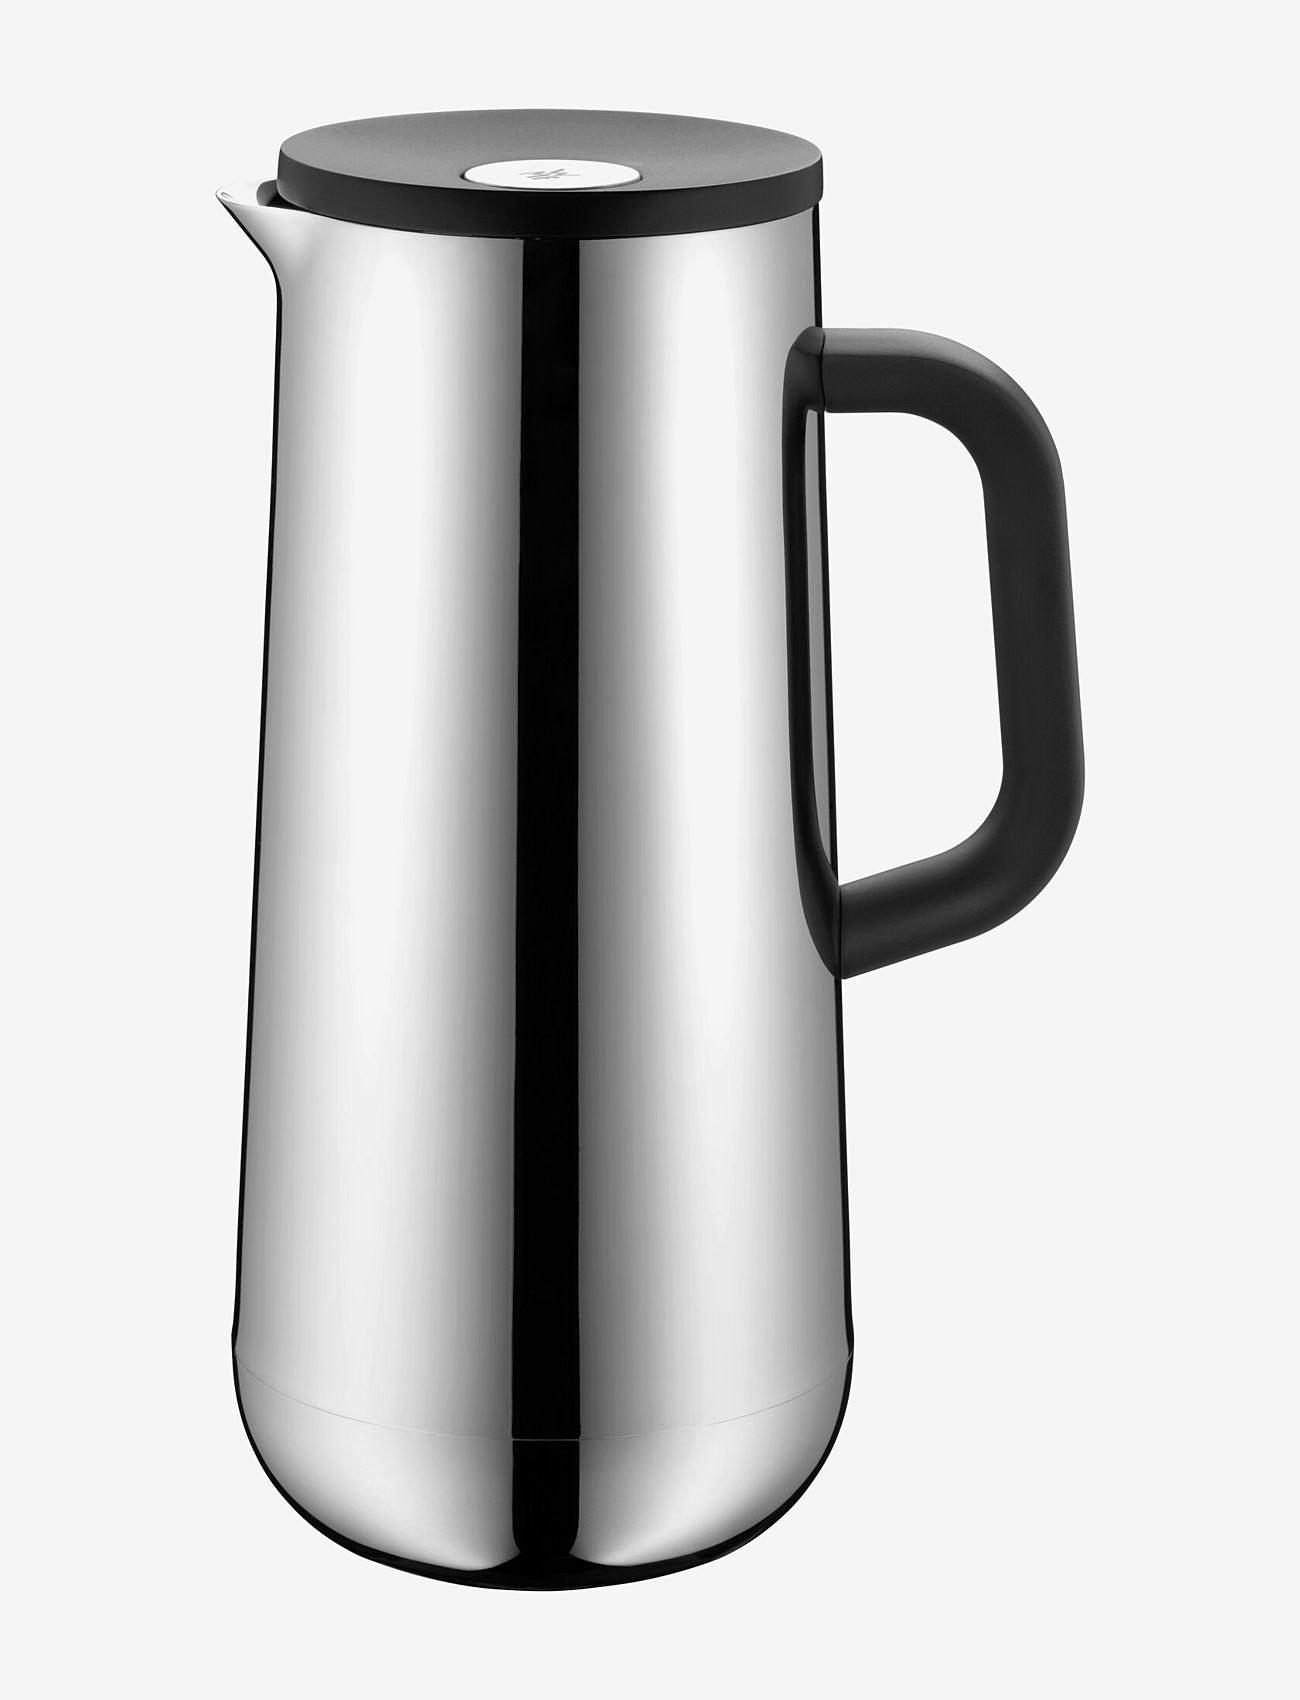 WMF - Impulse thermo jug, coffee 1,0 l., stainless steel - thermal carafes - cromargan - 0